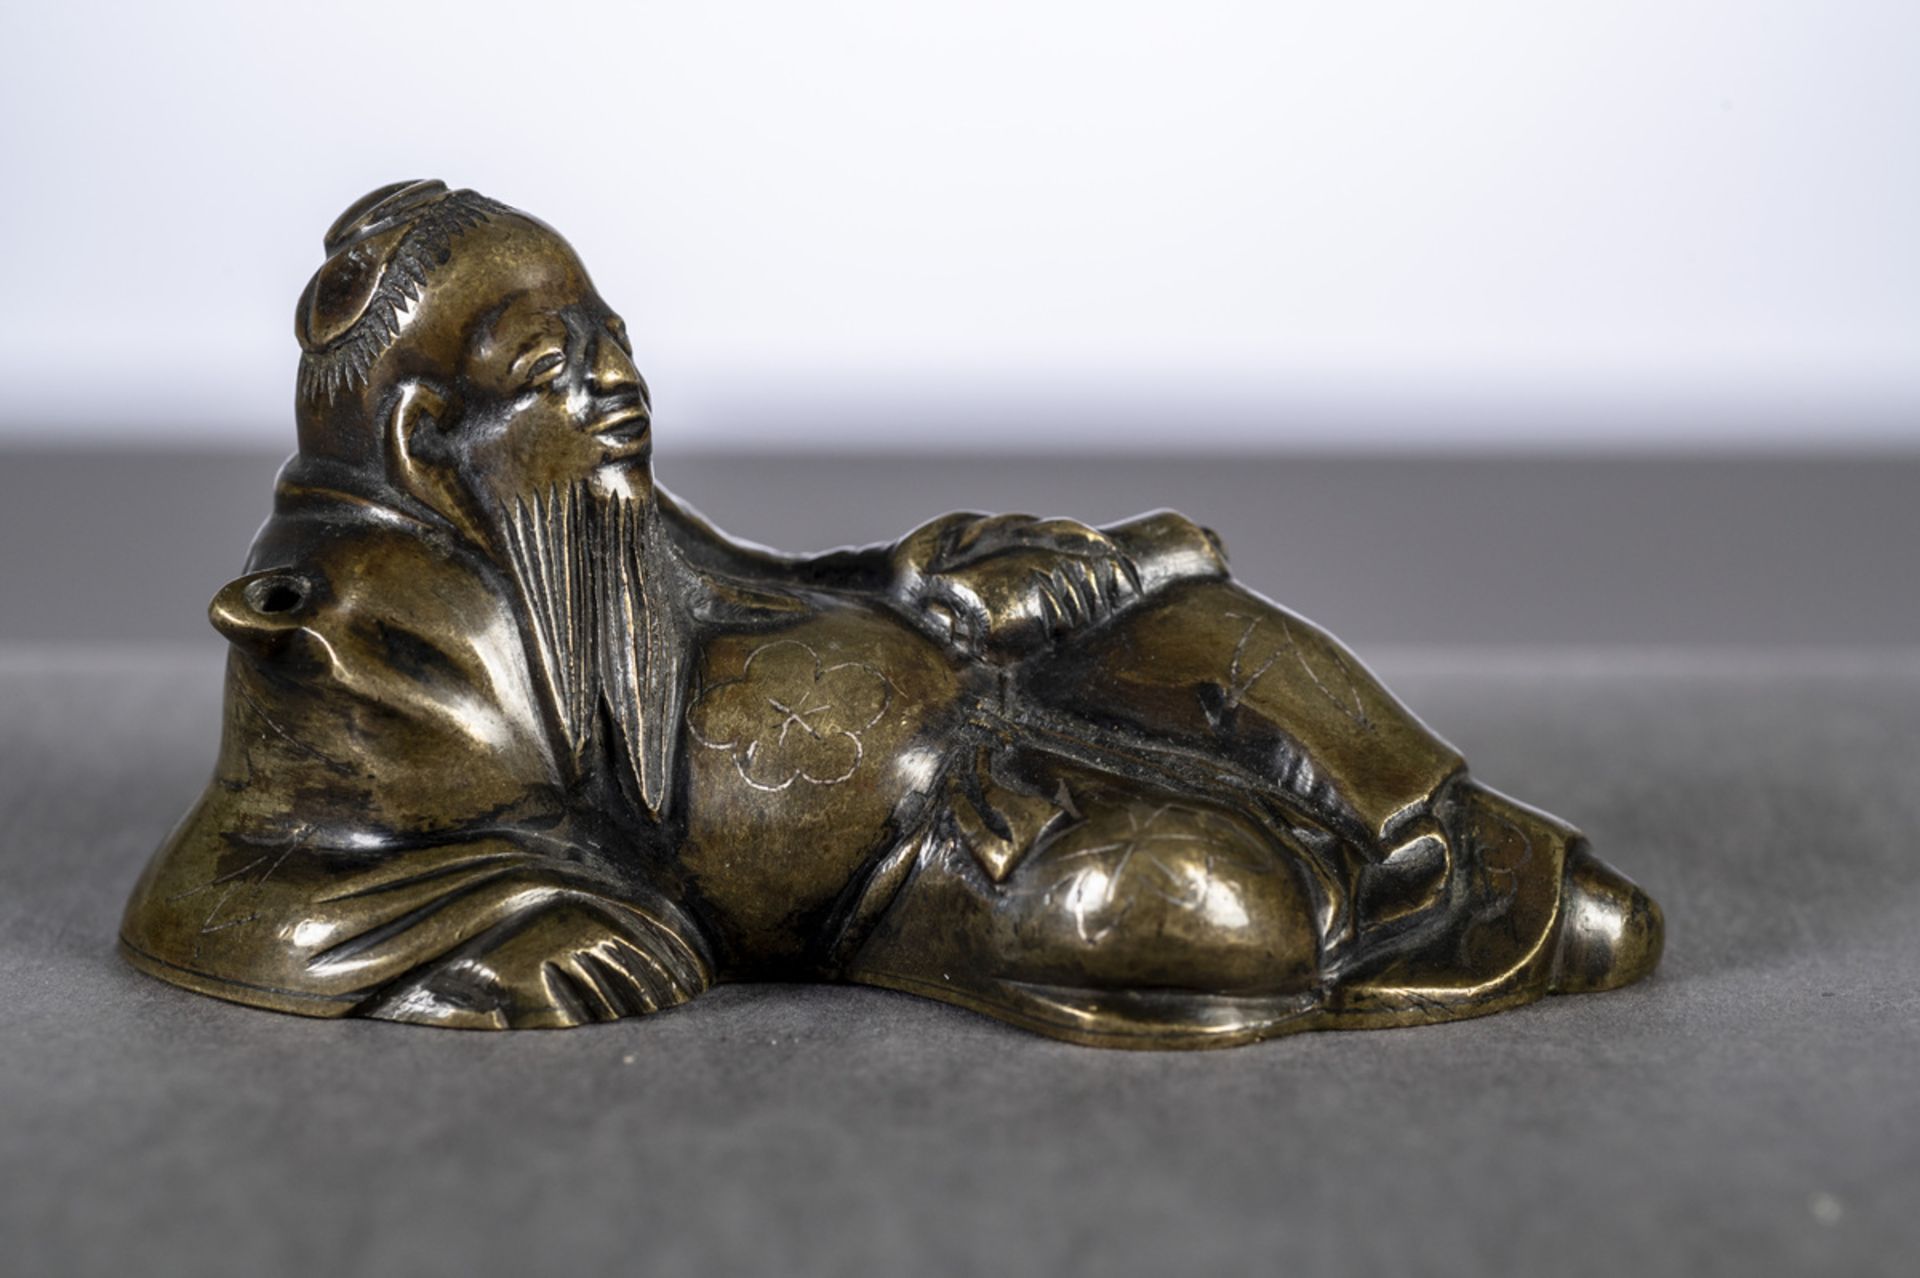 Chinese waterdrop in bronze with silver inlay 'reclining figure' (5x9.5x4cm)